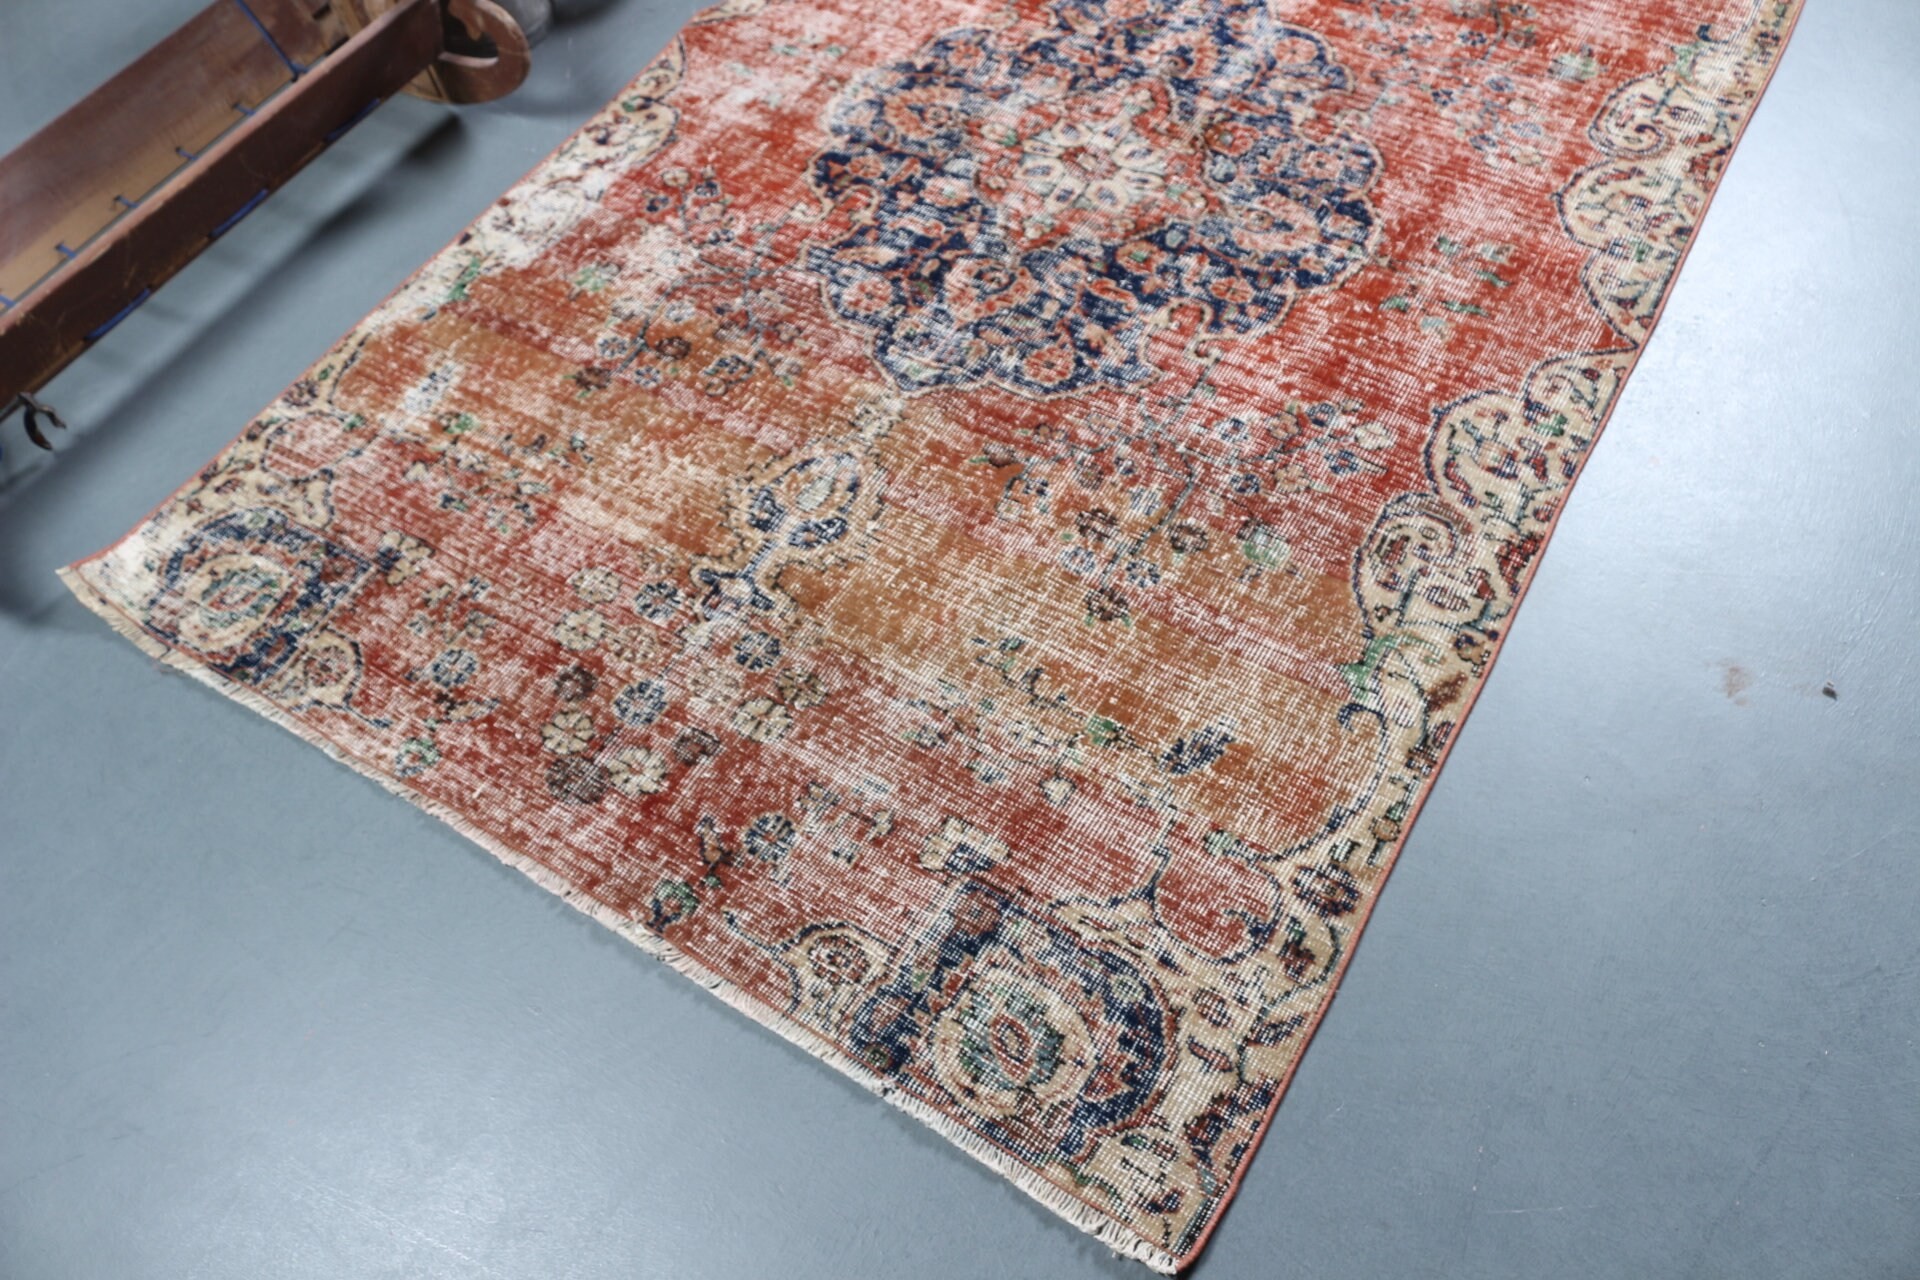 Cool Rugs, Dining Room Rugs, Oriental Rug, Vintage Rug, Red Home Decor Rug, Turkish Rugs, Kitchen Rugs, Pale Rugs, 4.6x7.8 ft Area Rug